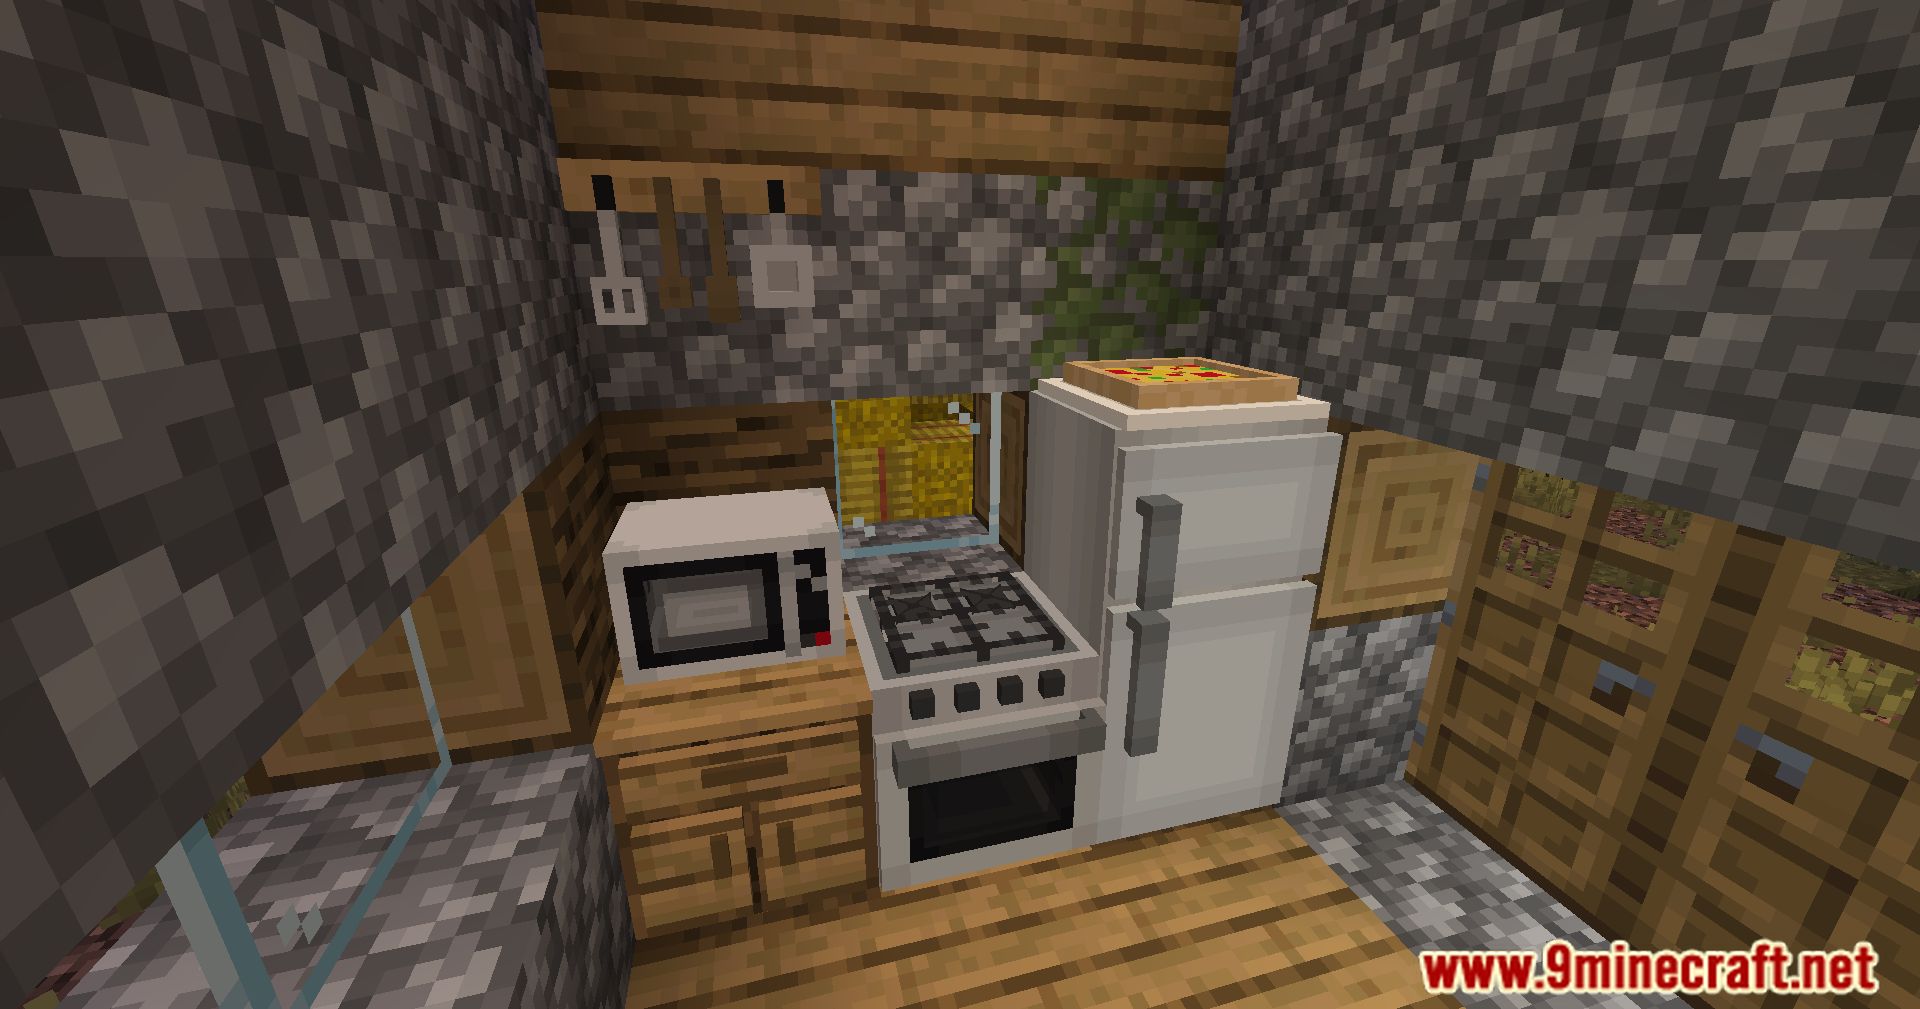 Moa Decor Cookery Mod (1.20.1, 1.19.4) - Infuse Artistic Flair Into Your Minecraft World! 12